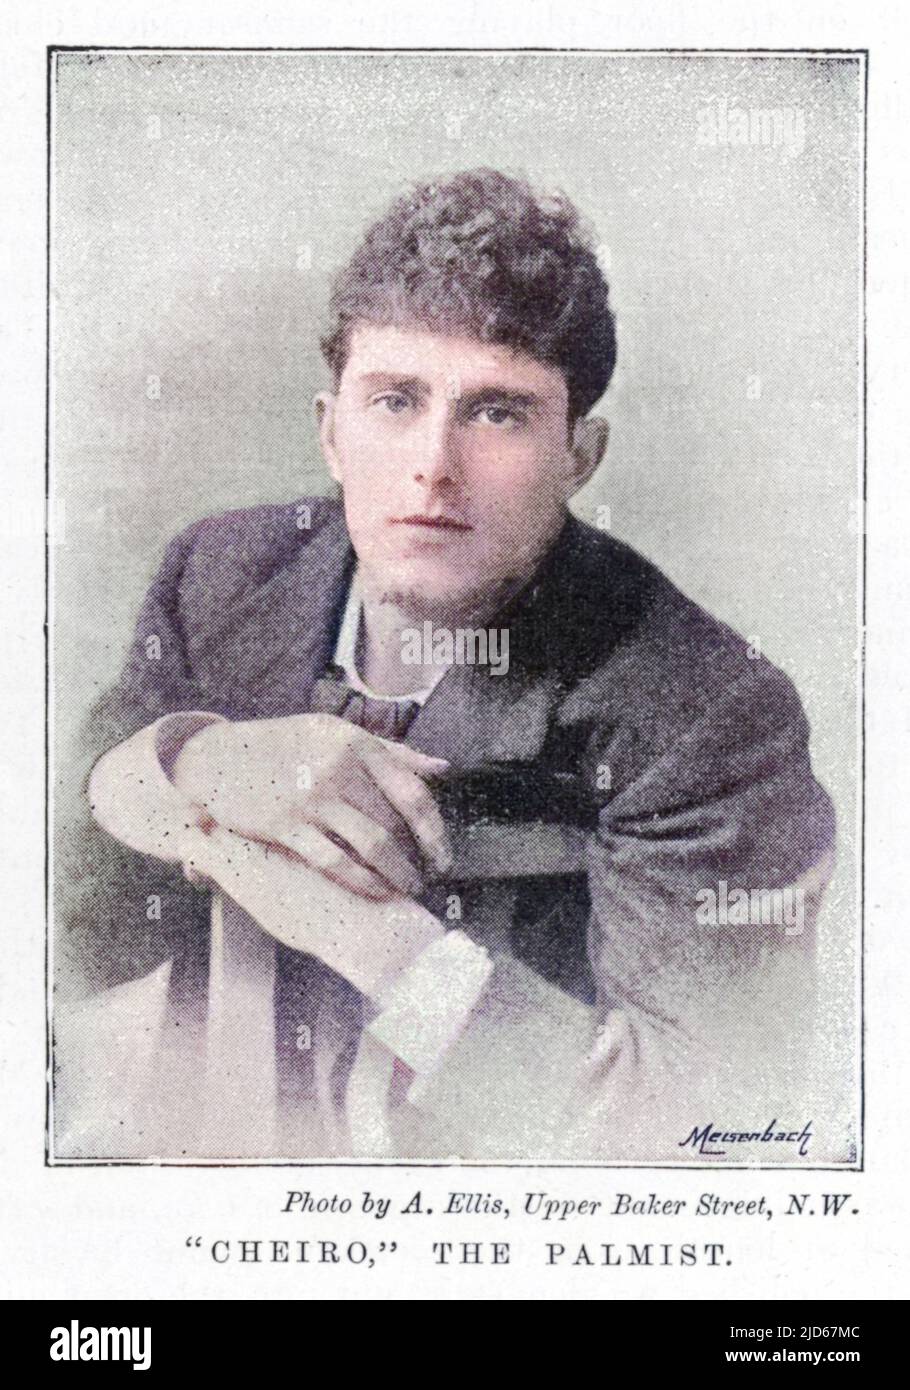 Count LOUIS HAMON [known as CHEIRO] (1866 - 1936), Irish palm reader. Colourised version of : 10022684       Date: 1893 Stock Photo